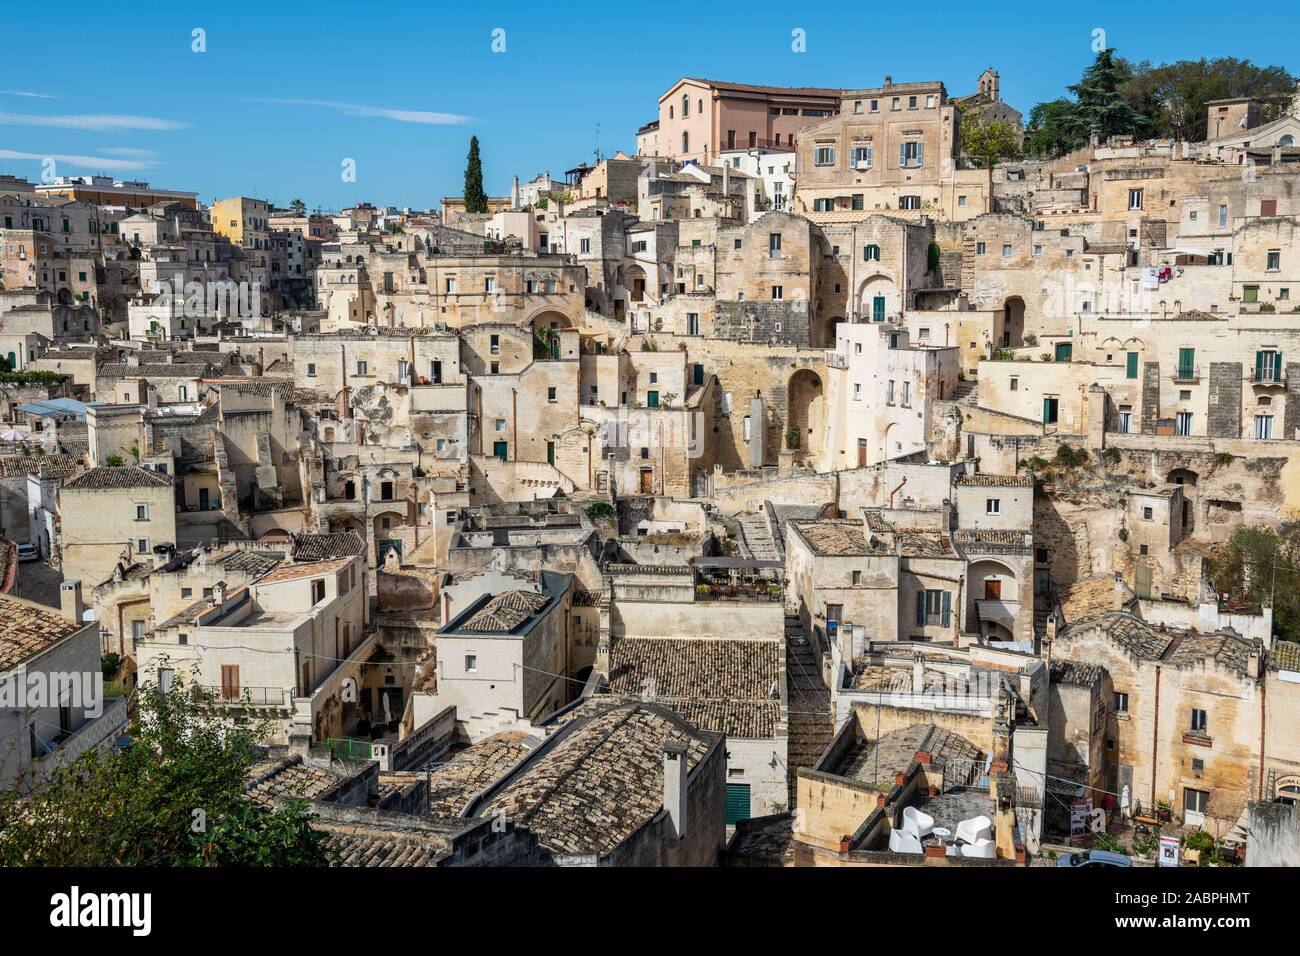 General view across Sasso Barisano from Piazza Duomo in Sassi District of Matera, Basilicata Region, Southern Italy Stock Photo